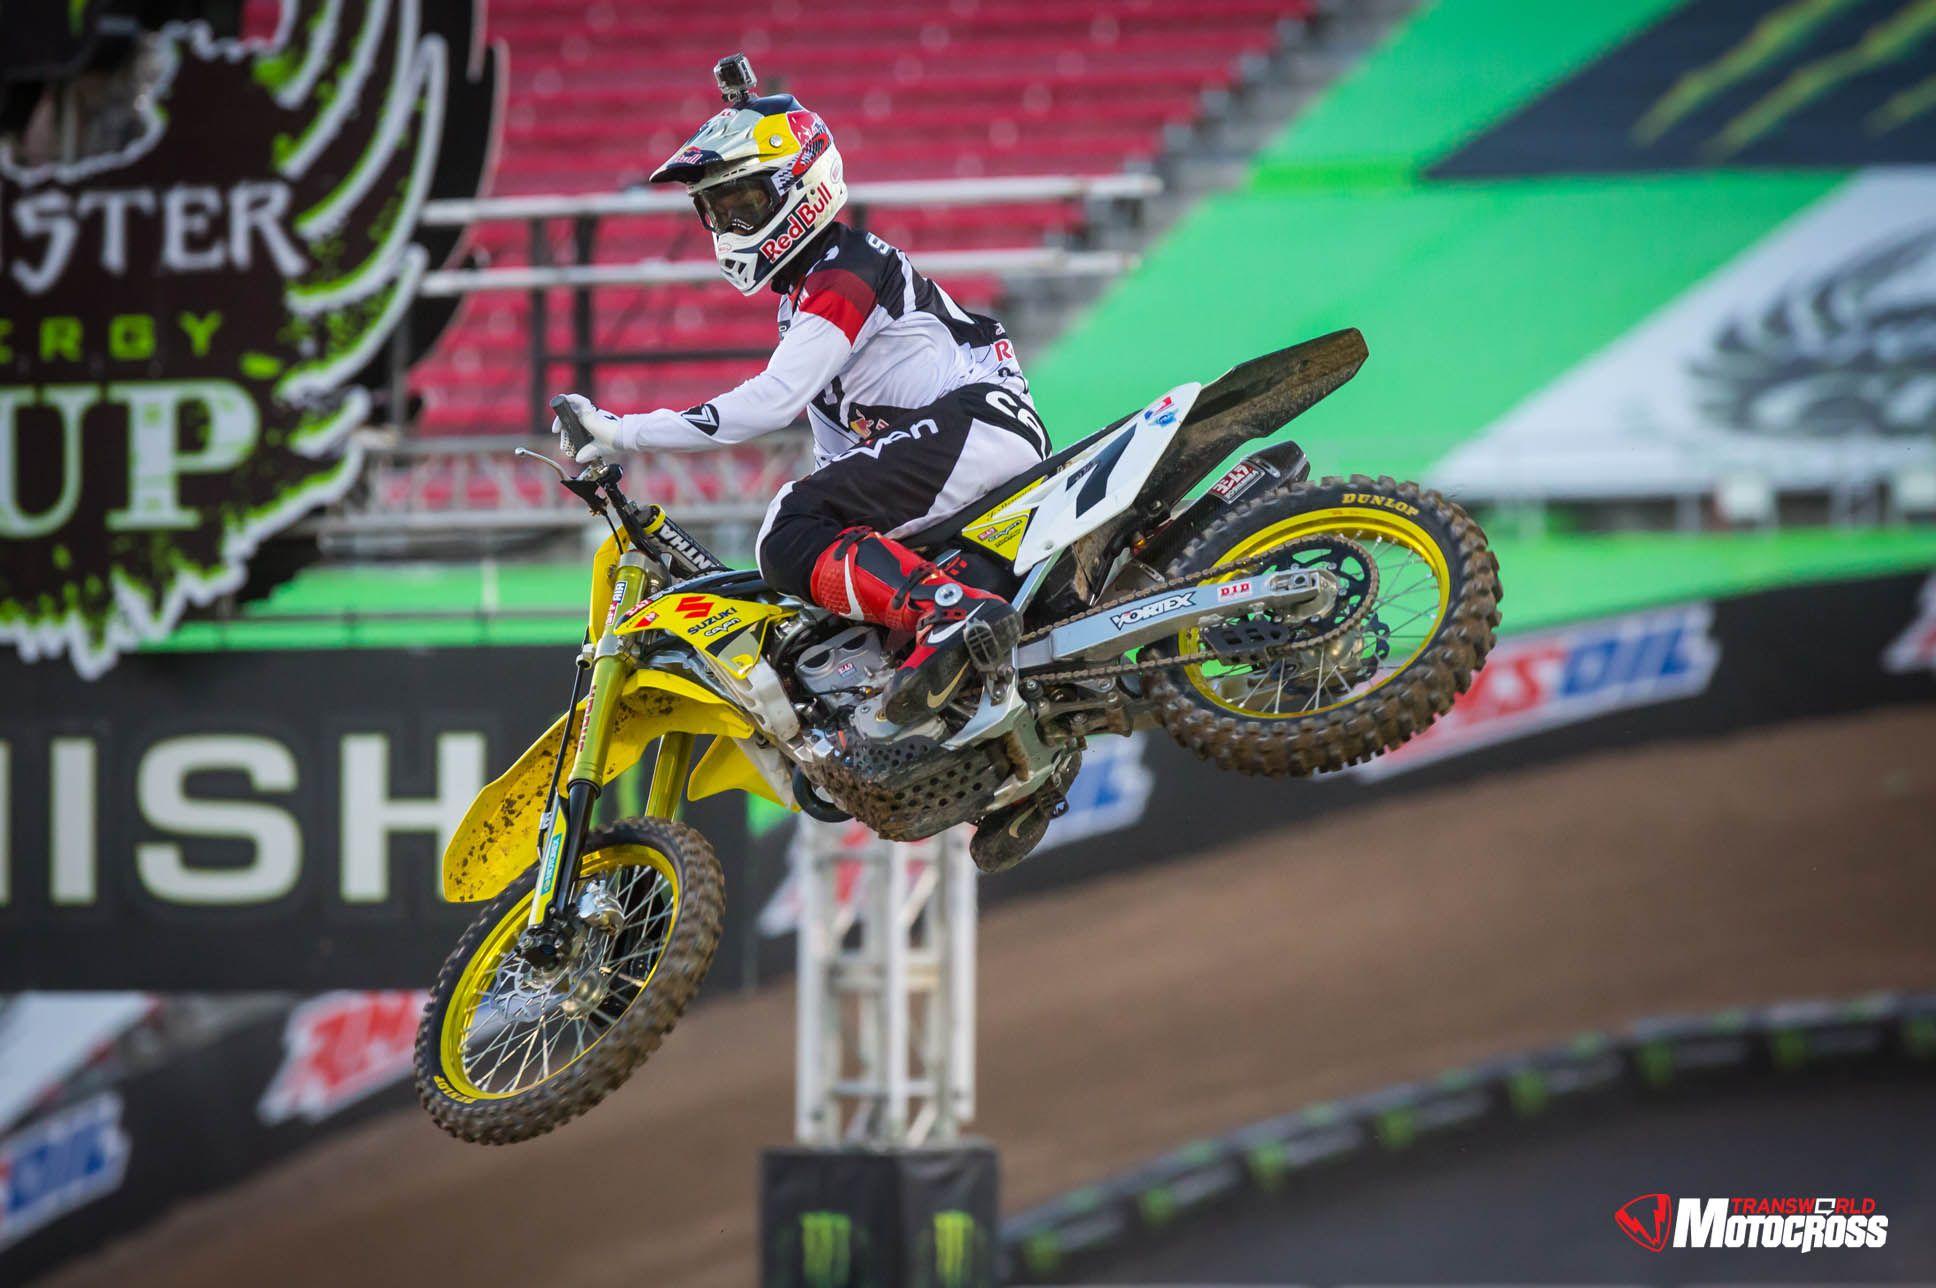 Back On Top: JS7 Wallpaper And Photo Gallery. TransWorld Motocross